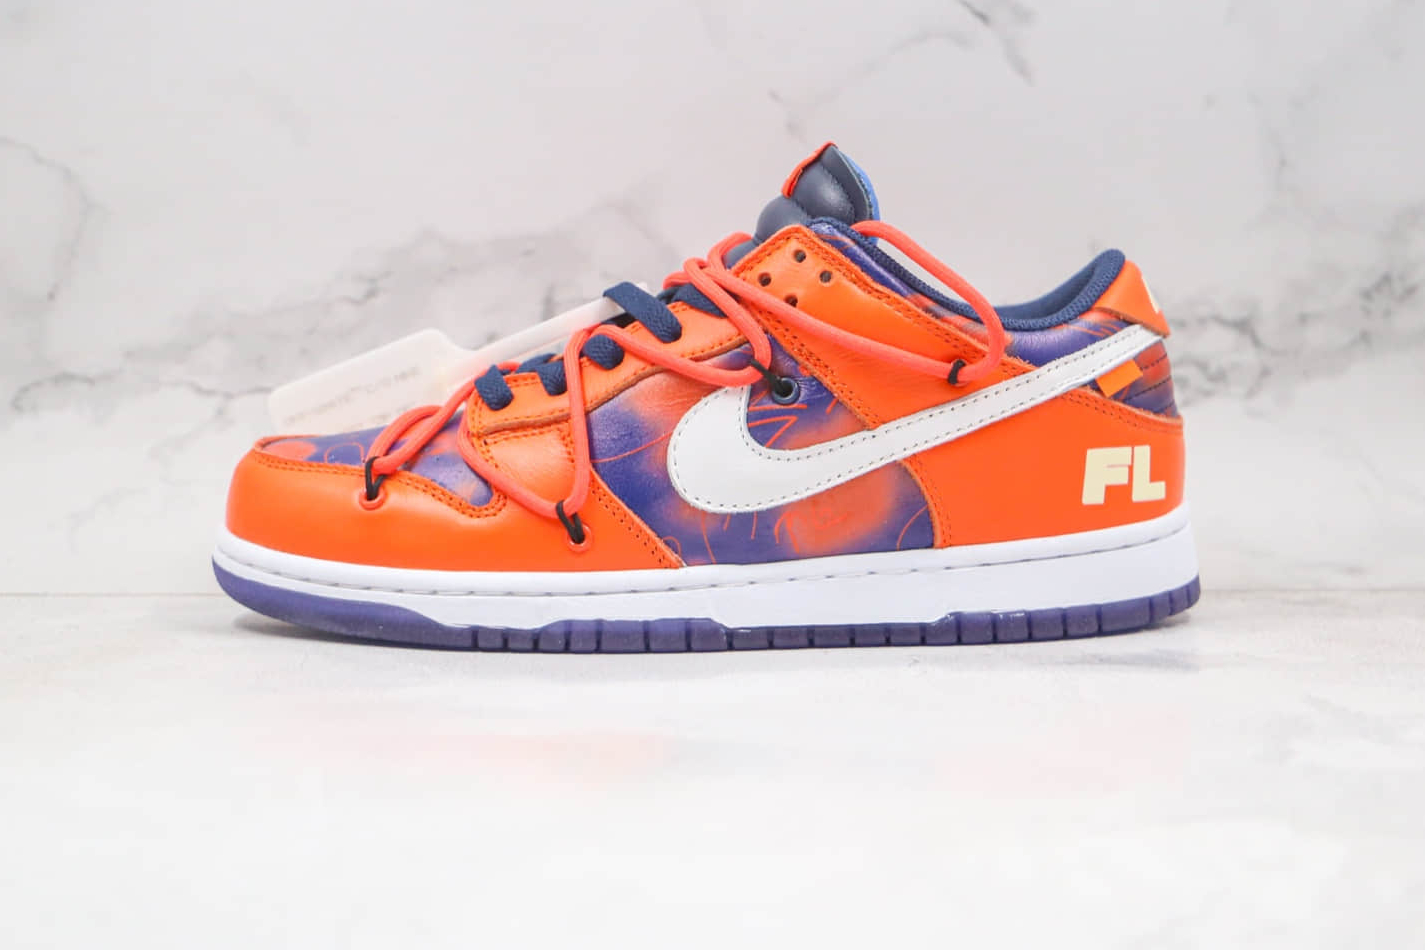 OFF-WHITE x Nike SB Dunk Low Orange Perple White Shoes CT0856-801 - Premium Collaboration Dunk with Eye-Catching Colors!